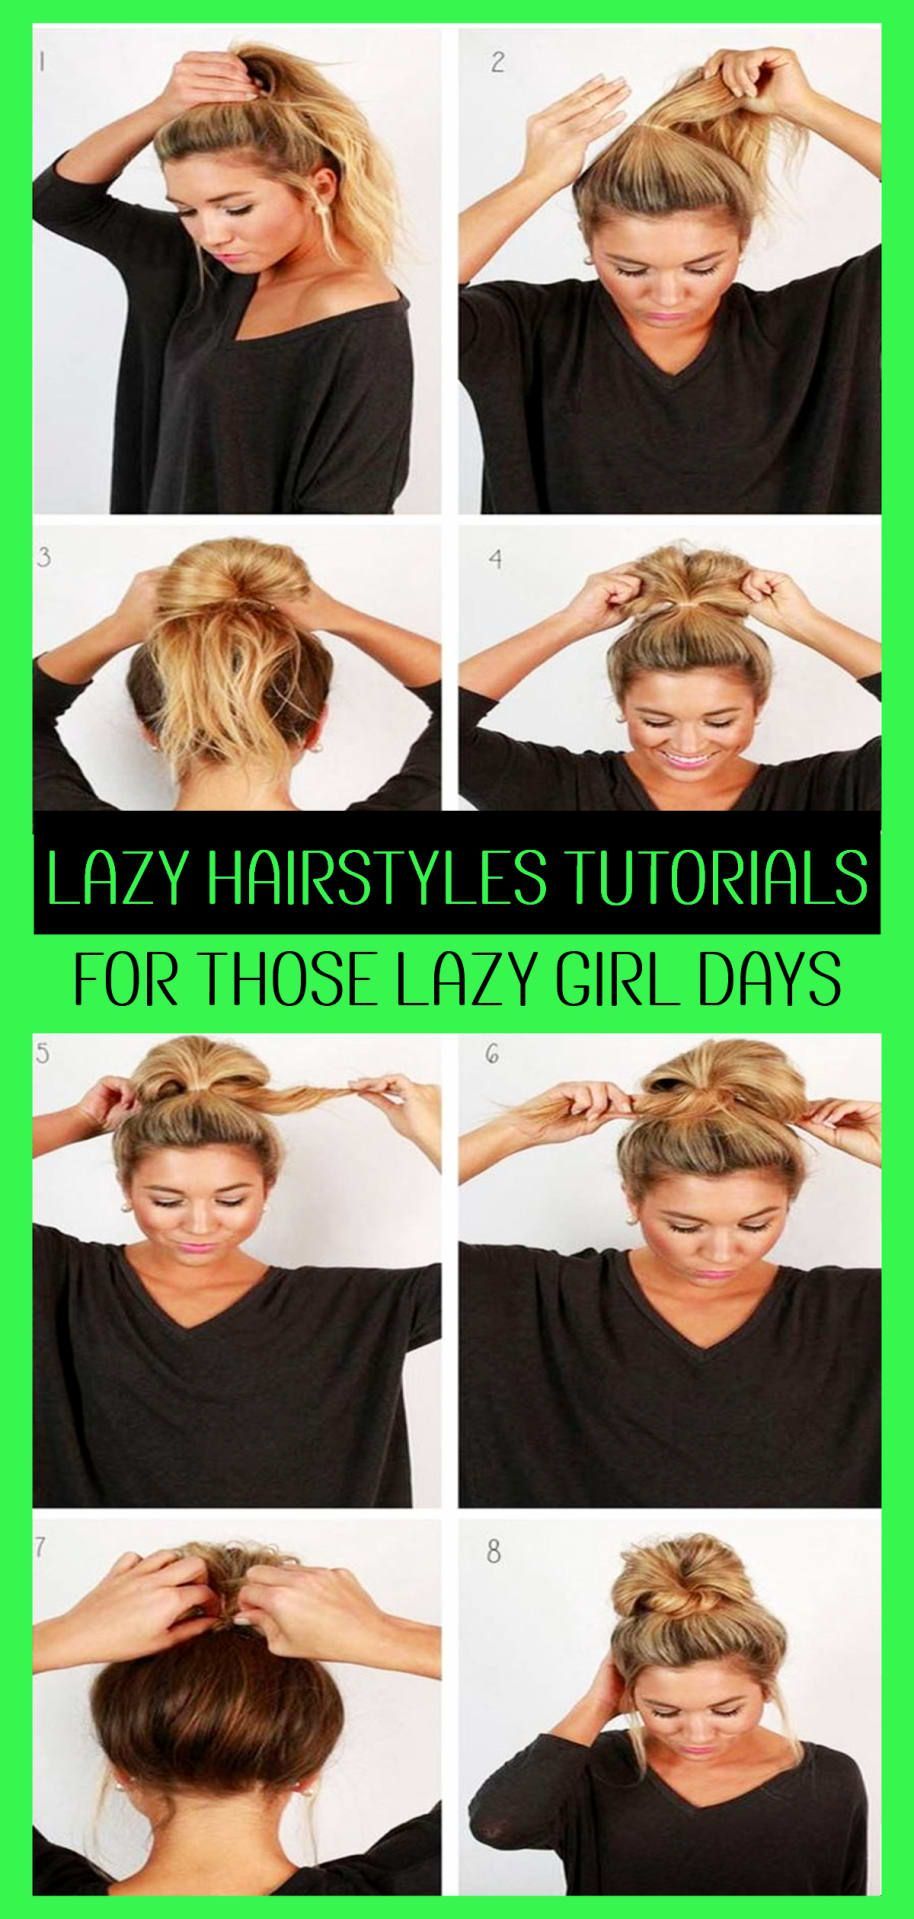 10 EASY Lazy Girl Hairstyle Ideas {Step By Step Video Tutorials For Lazy Day Running Late Quick Hairstyles} -   16 hairstyles Quick lazy girl ideas